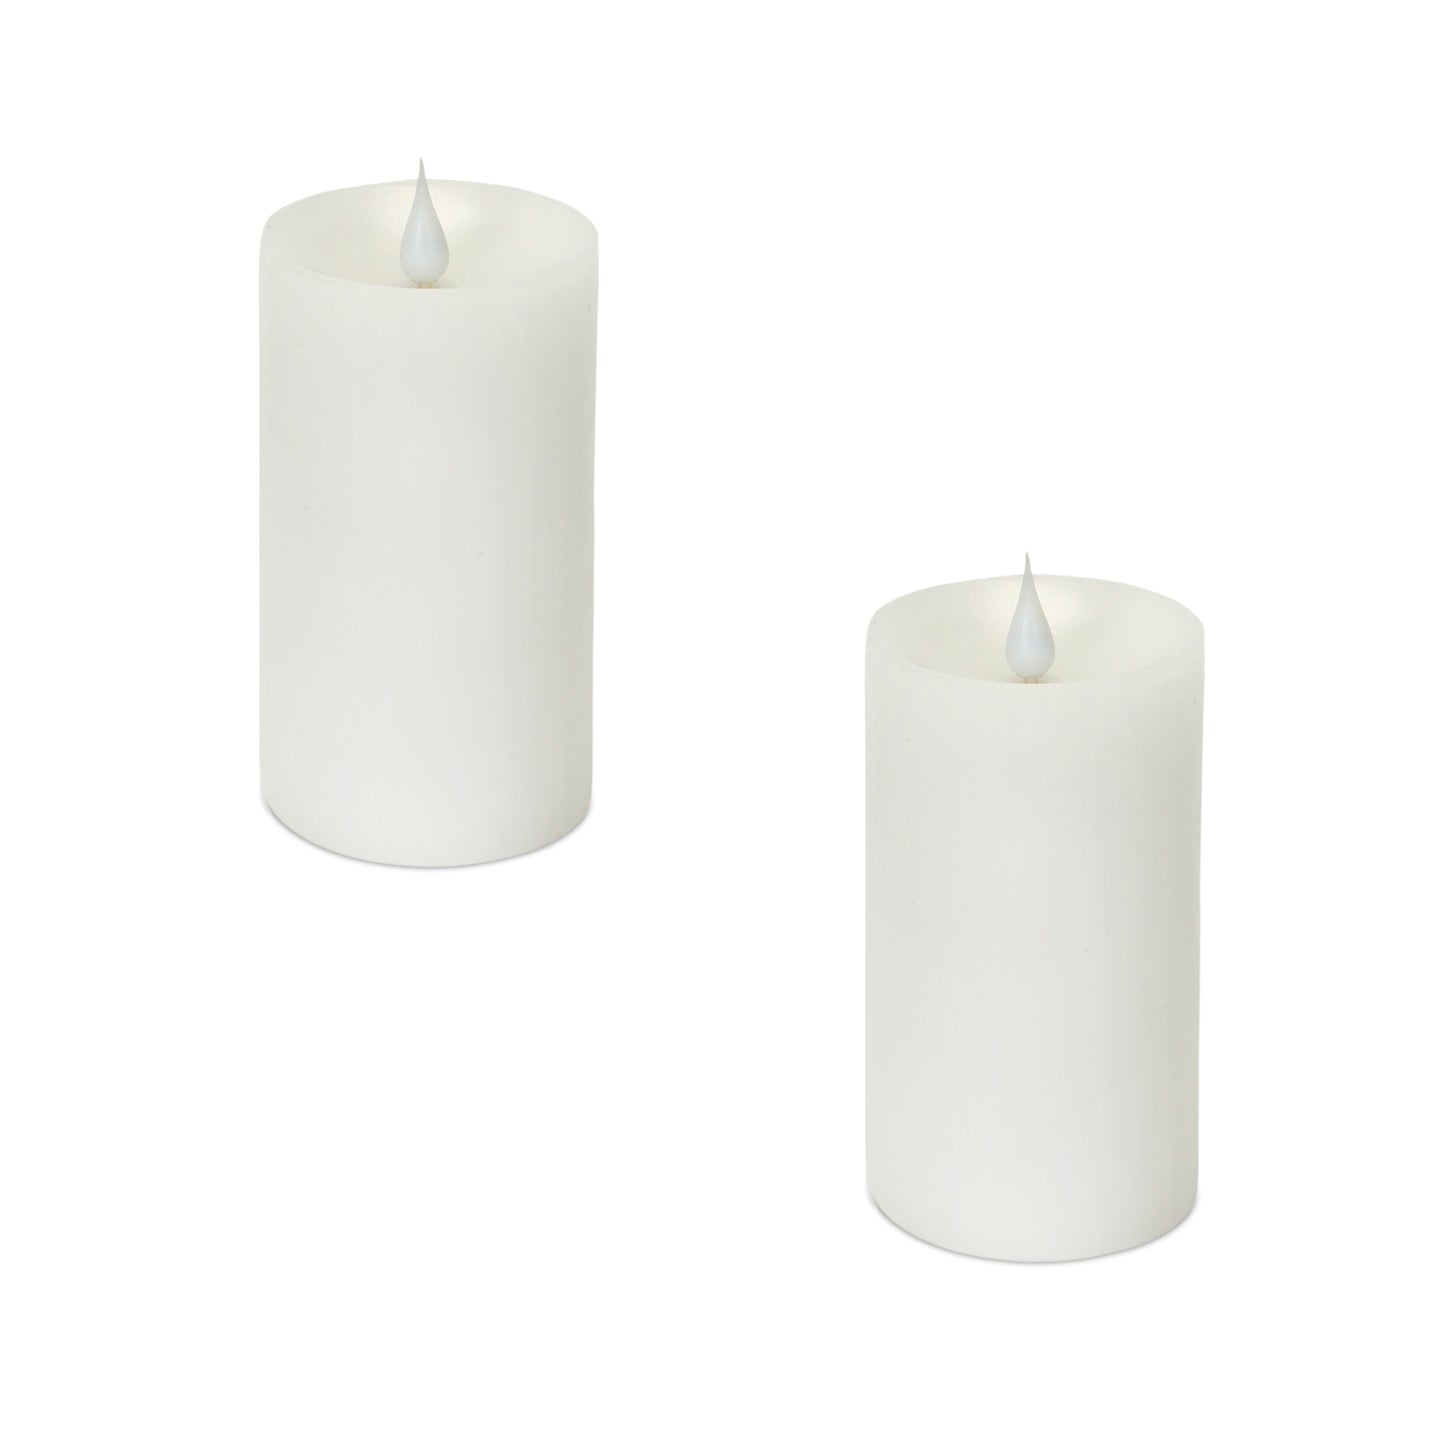 Simplux Designer LED Candle with Moving Flame and Remote (Set of 2)